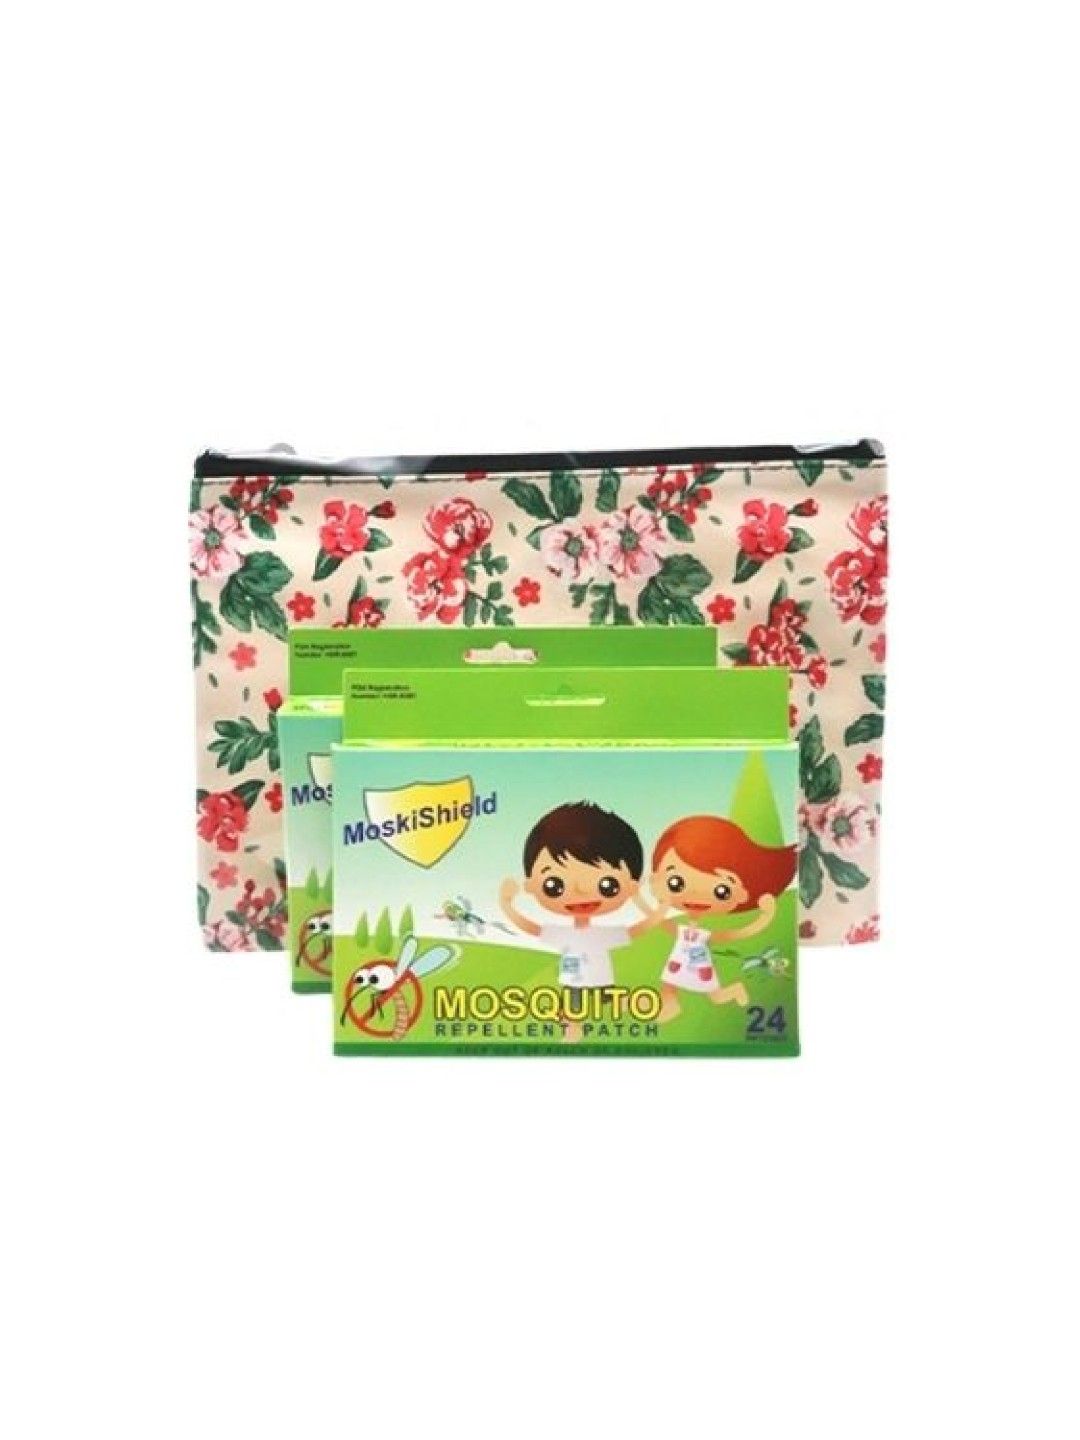 Moskishield Mosquito Repellent Patch (Set of 2) with Free Multipurpose Pouch (No Color- Image 1)